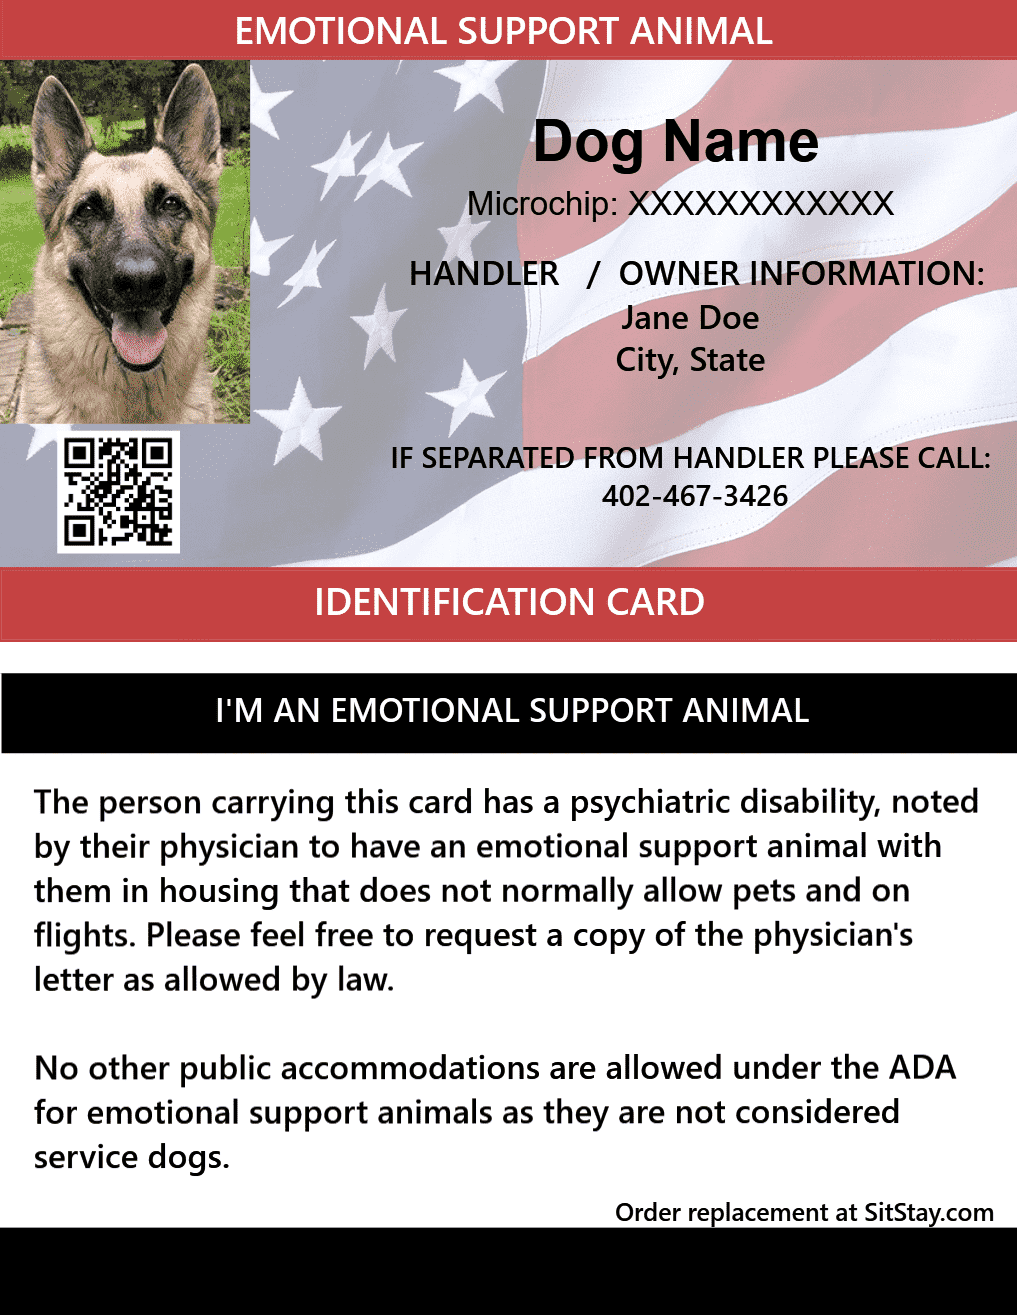 id-cards-for-emotional-support-dogs-tagged-police-k9-supplies-sitstay